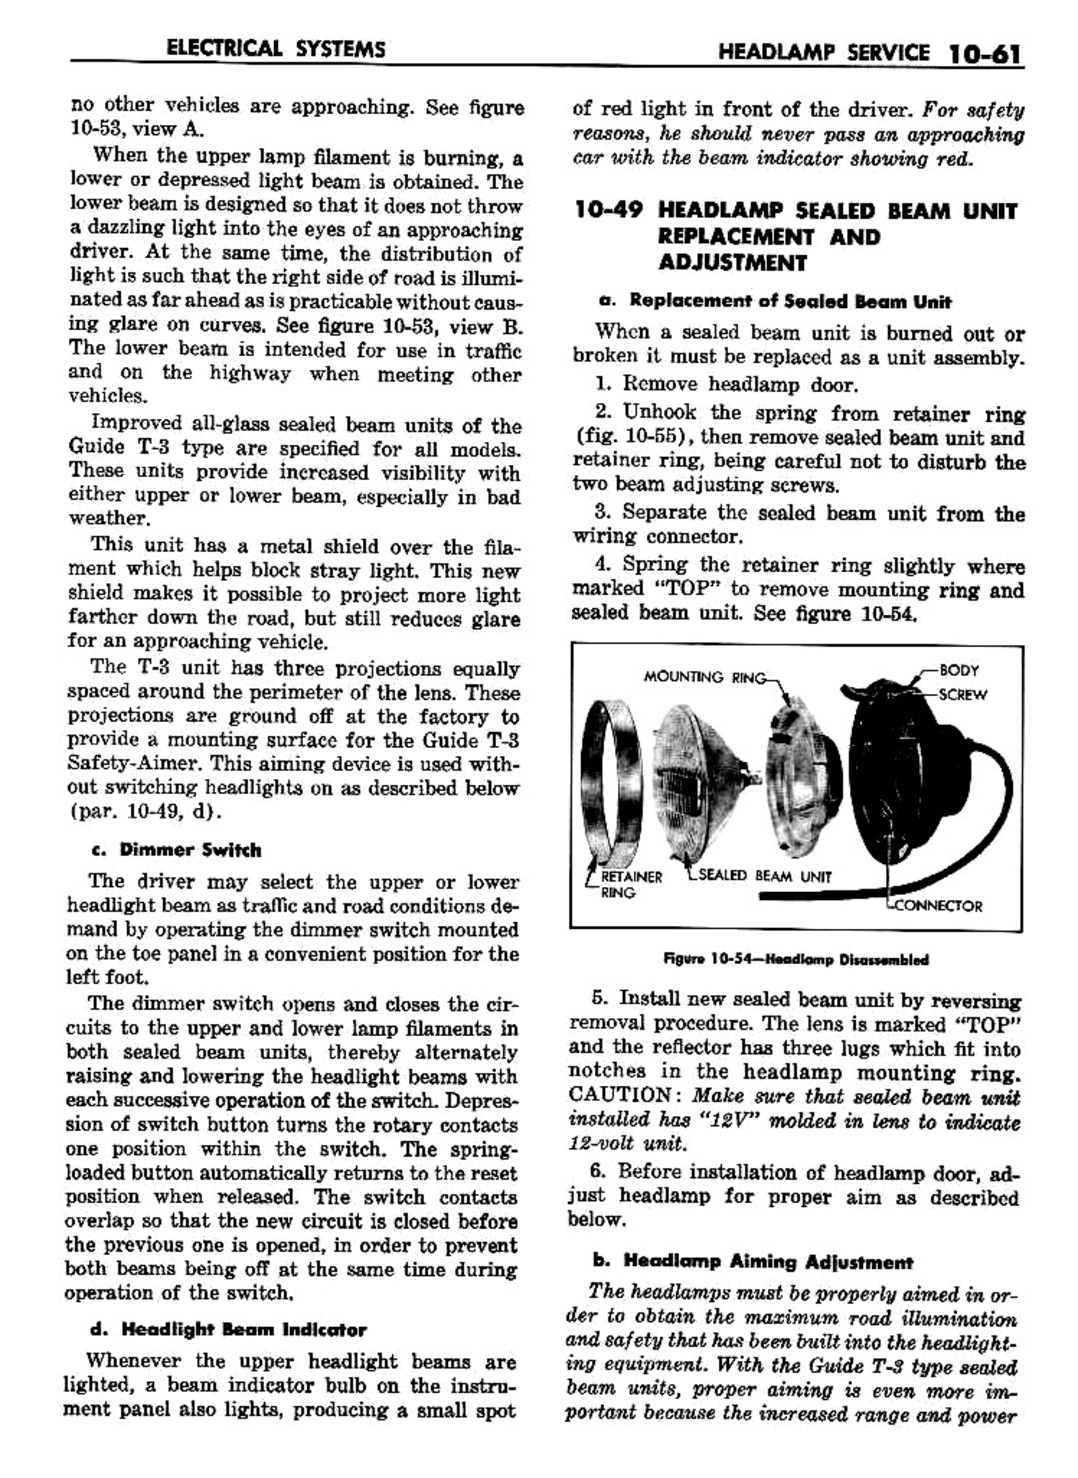 n_11 1957 Buick Shop Manual - Electrical Systems-061-061.jpg